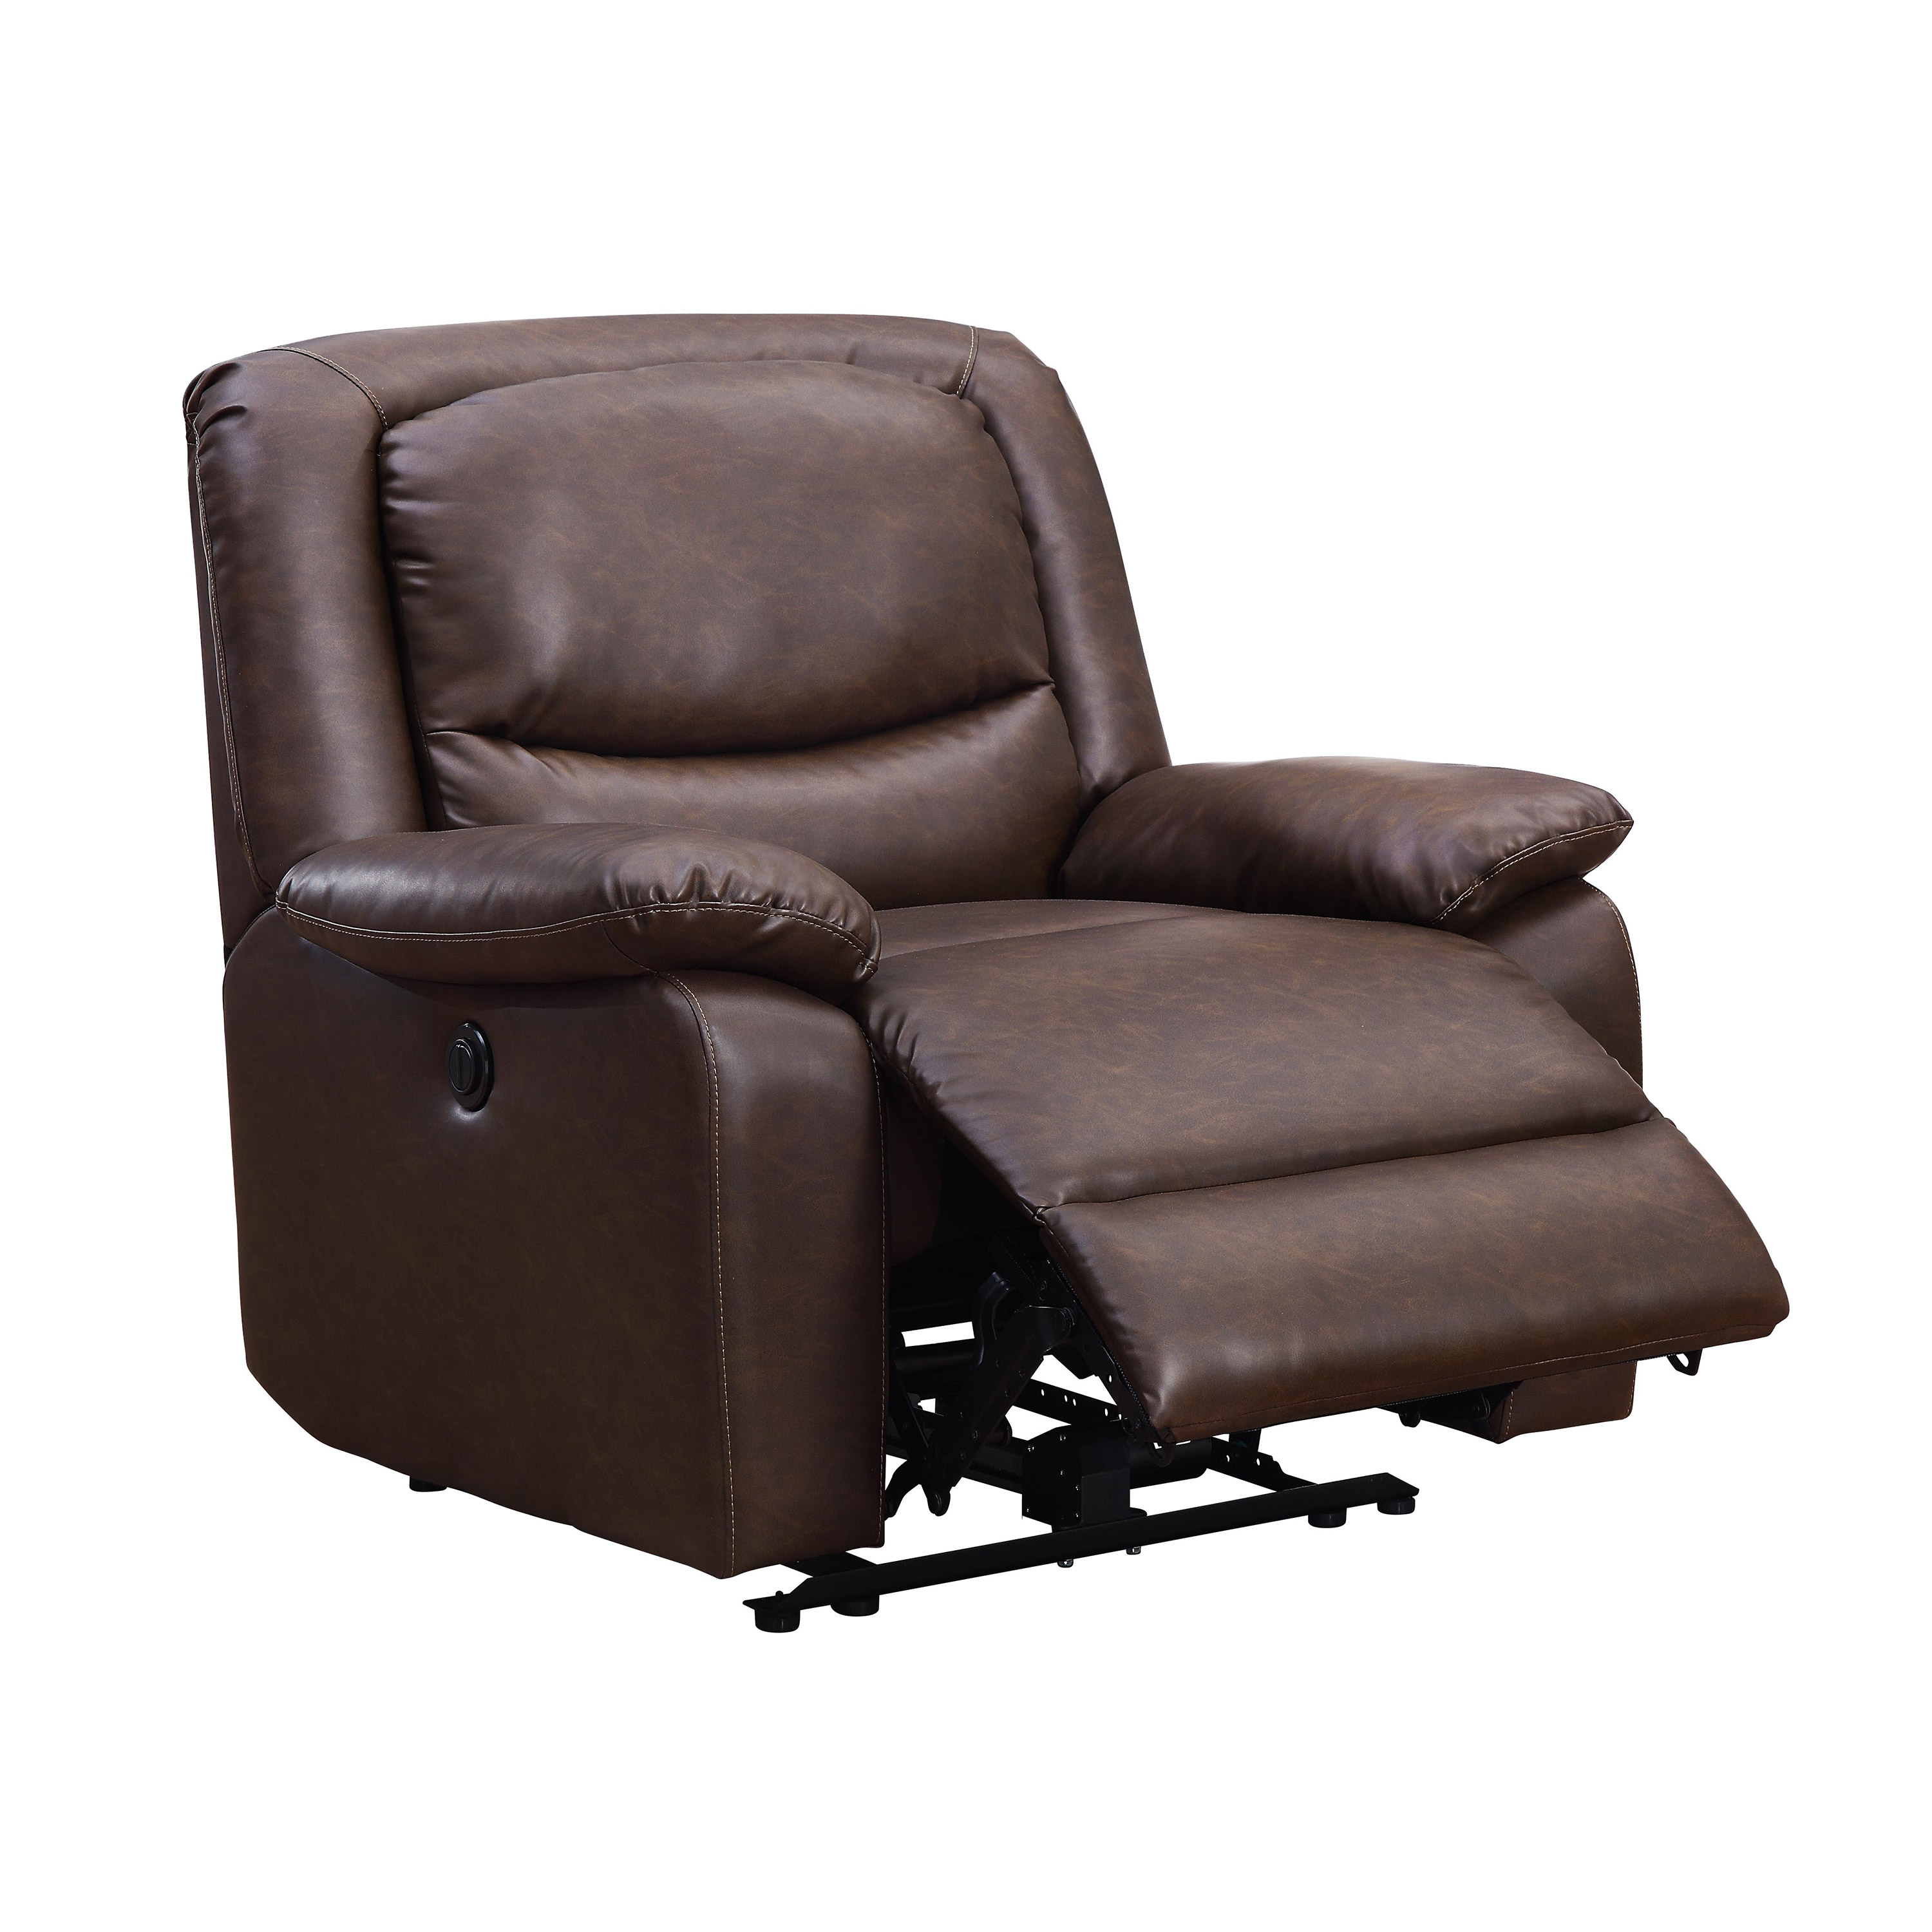 Serta Push-Button Power Recliner with Deep Body Cushions, Brown Faux Leather Upholstery - image 8 of 9